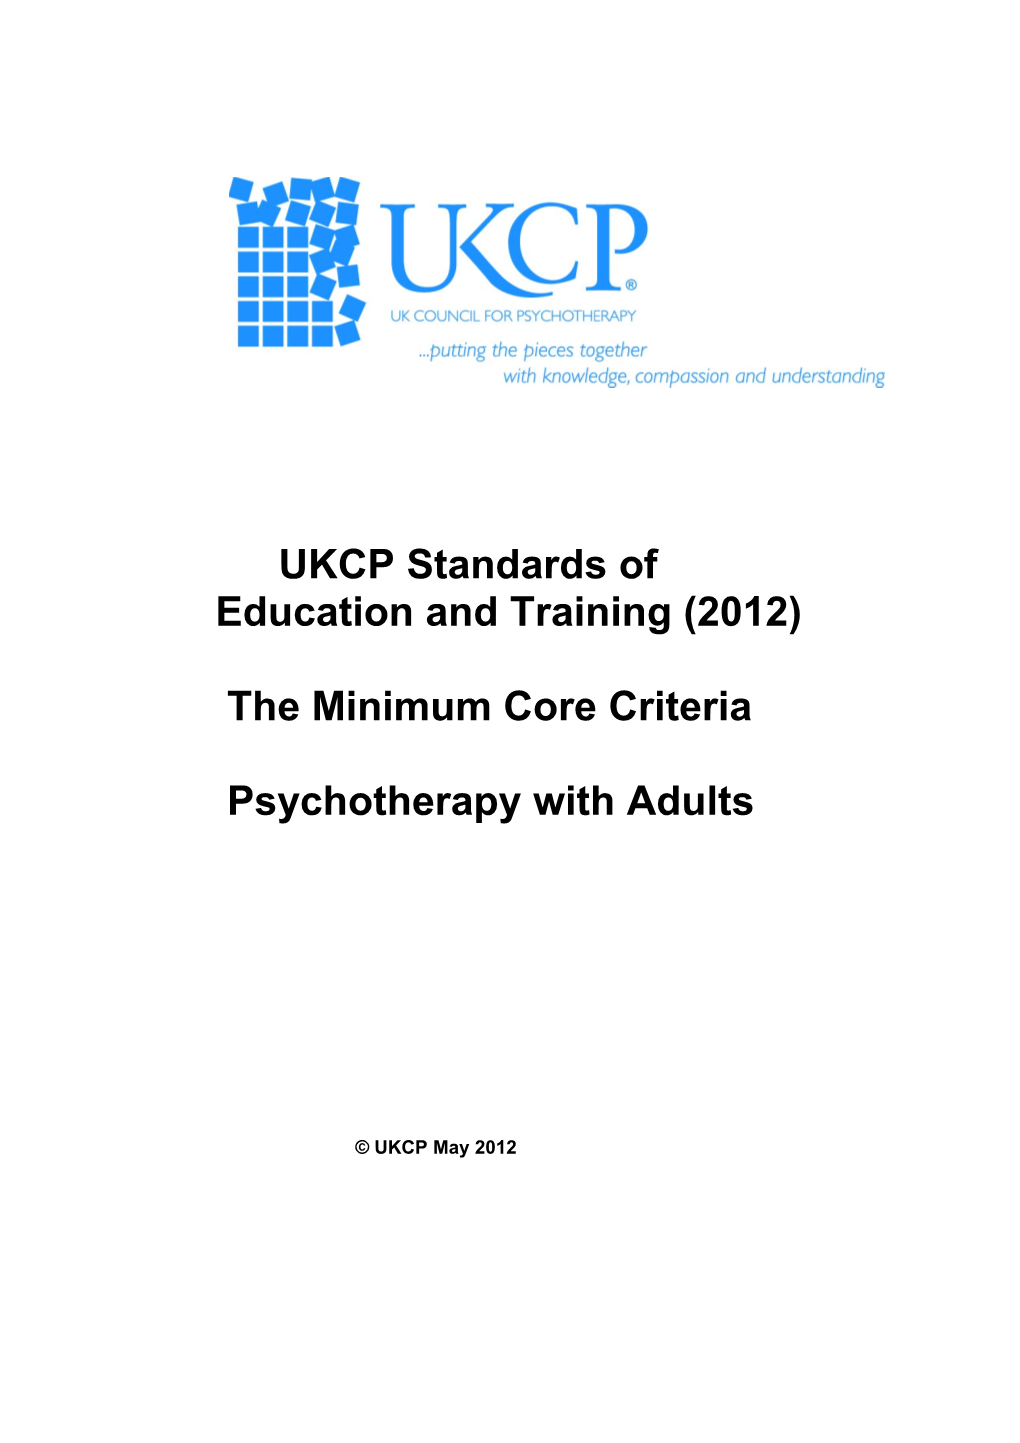 UKCP Standards of Education and Training (2012)